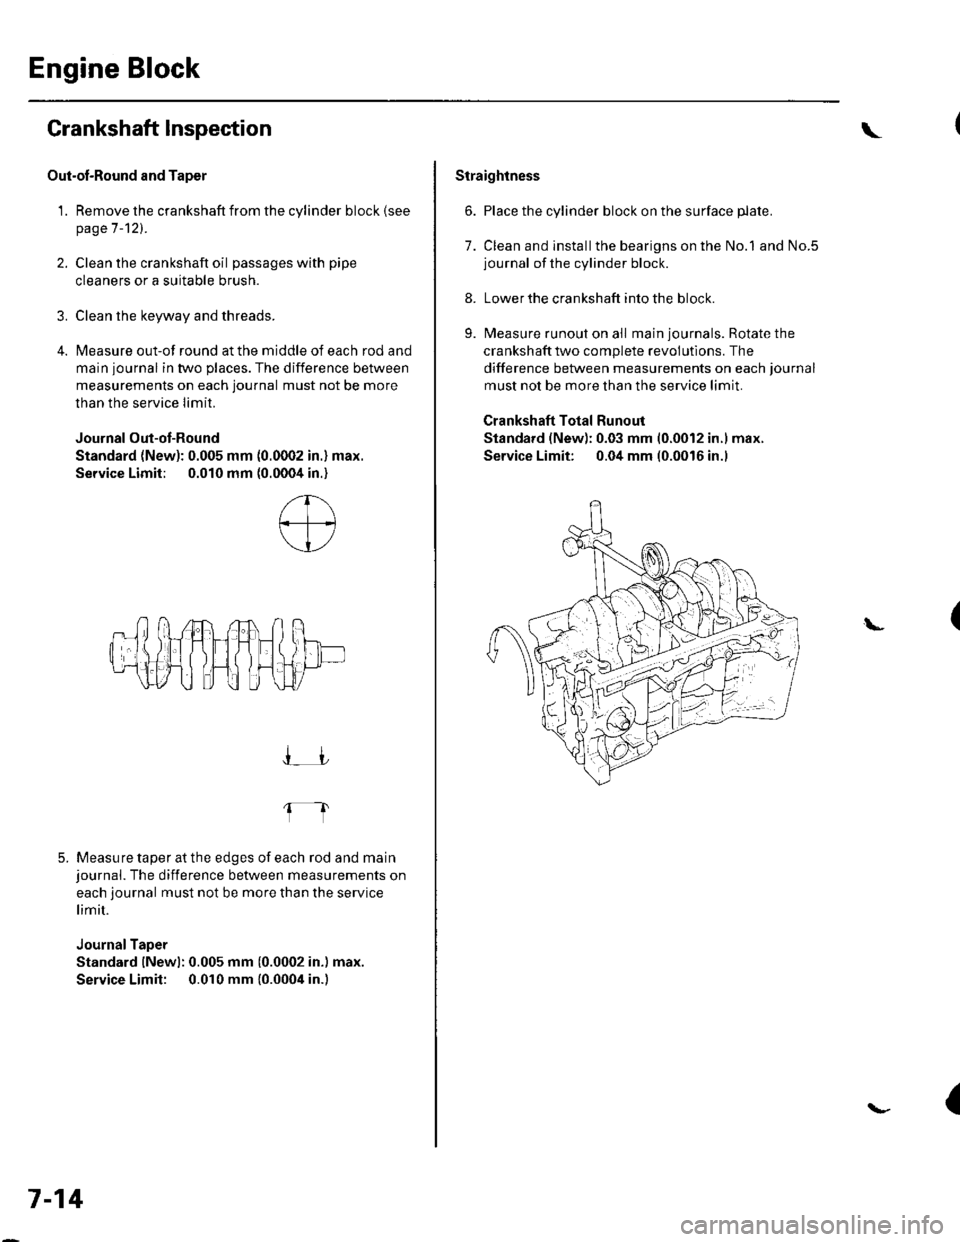 HONDA CIVIC 2003 7.G Workshop Manual Engine Block
Crankshaft lnspection
Out-ol-Round and Taper
1. Remove the crankshaft from the cylinder block (see
page 7-121.
2. Clean the crankshaft oil passages with pipe
cleaners or a suitable brush.